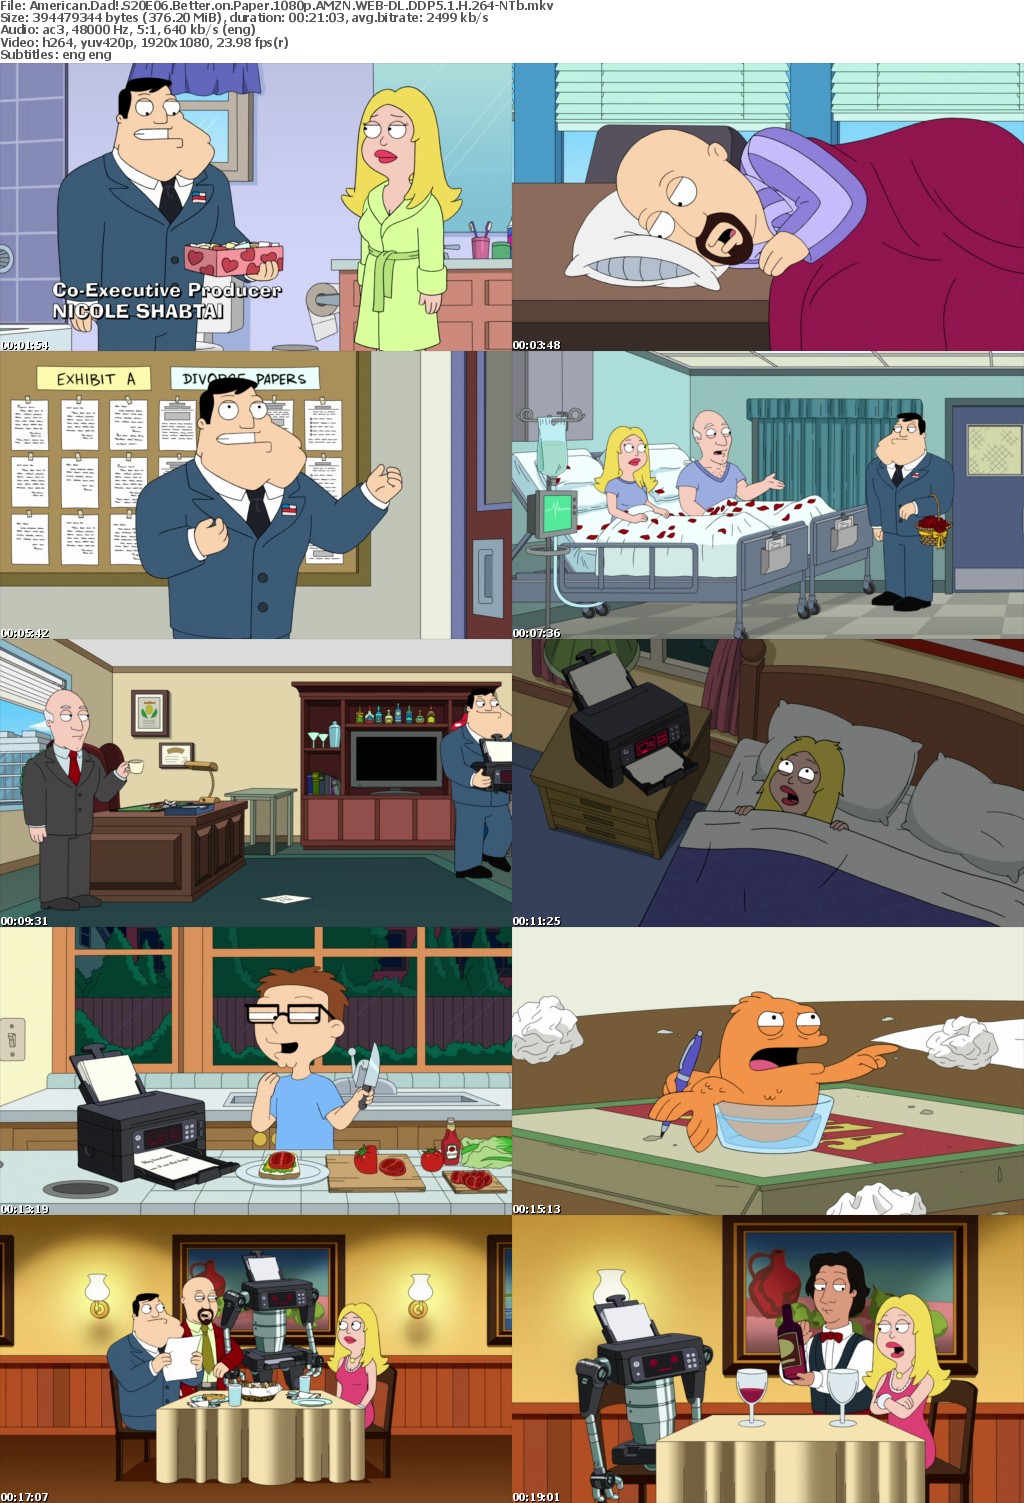 American Dad S20E06 Better on Paper 1080p AMZN WEBRip DDP5 1 x264-NTb